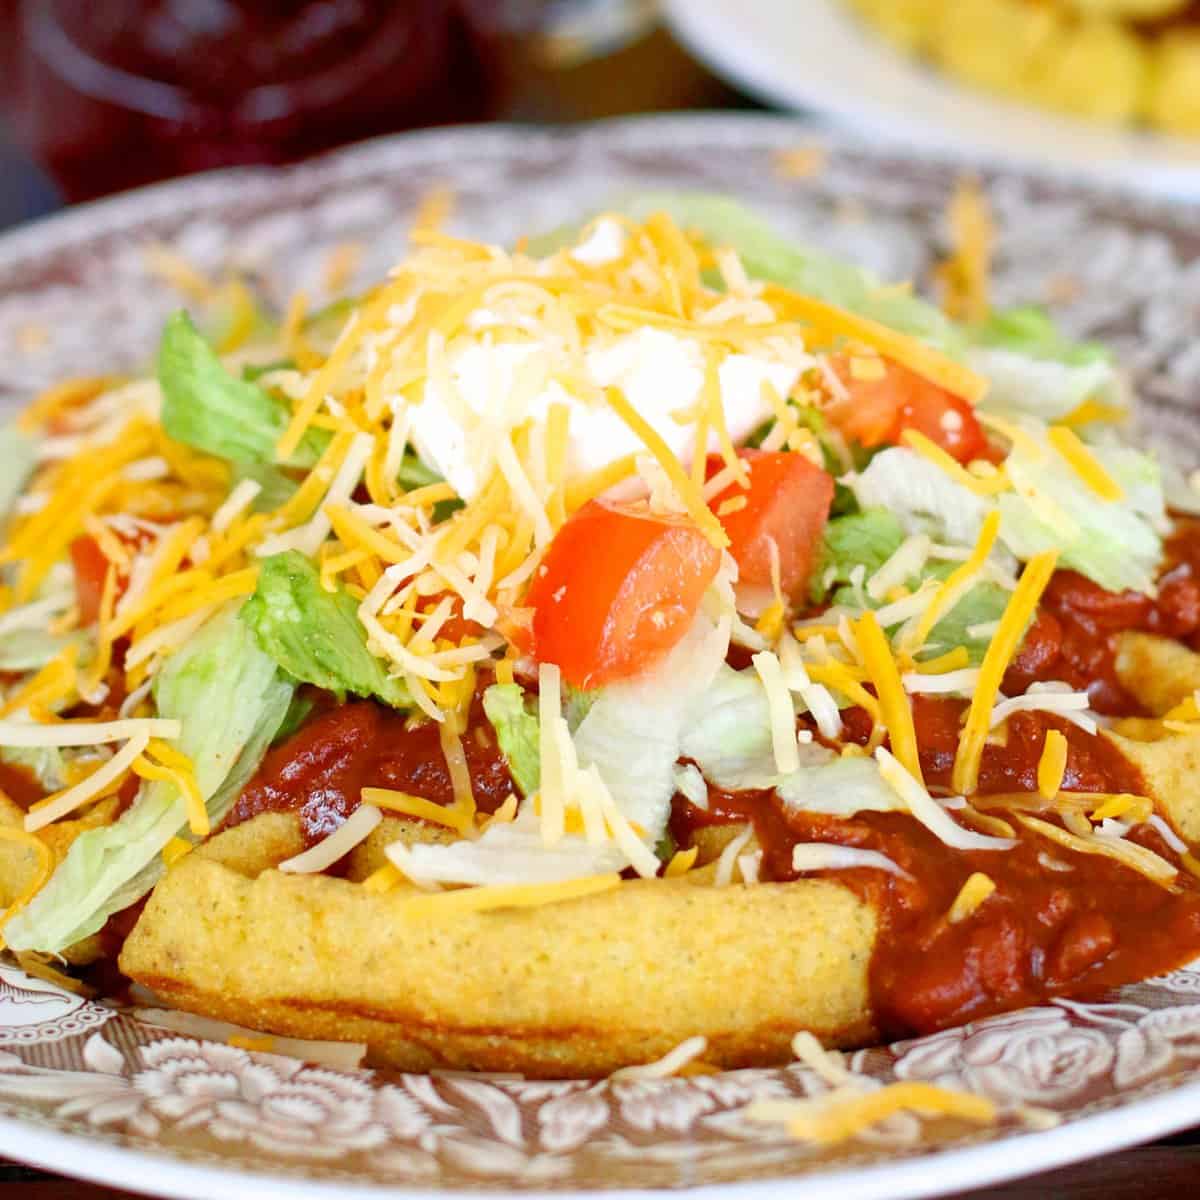 Cornbread Waffles with Chili and Fixins’